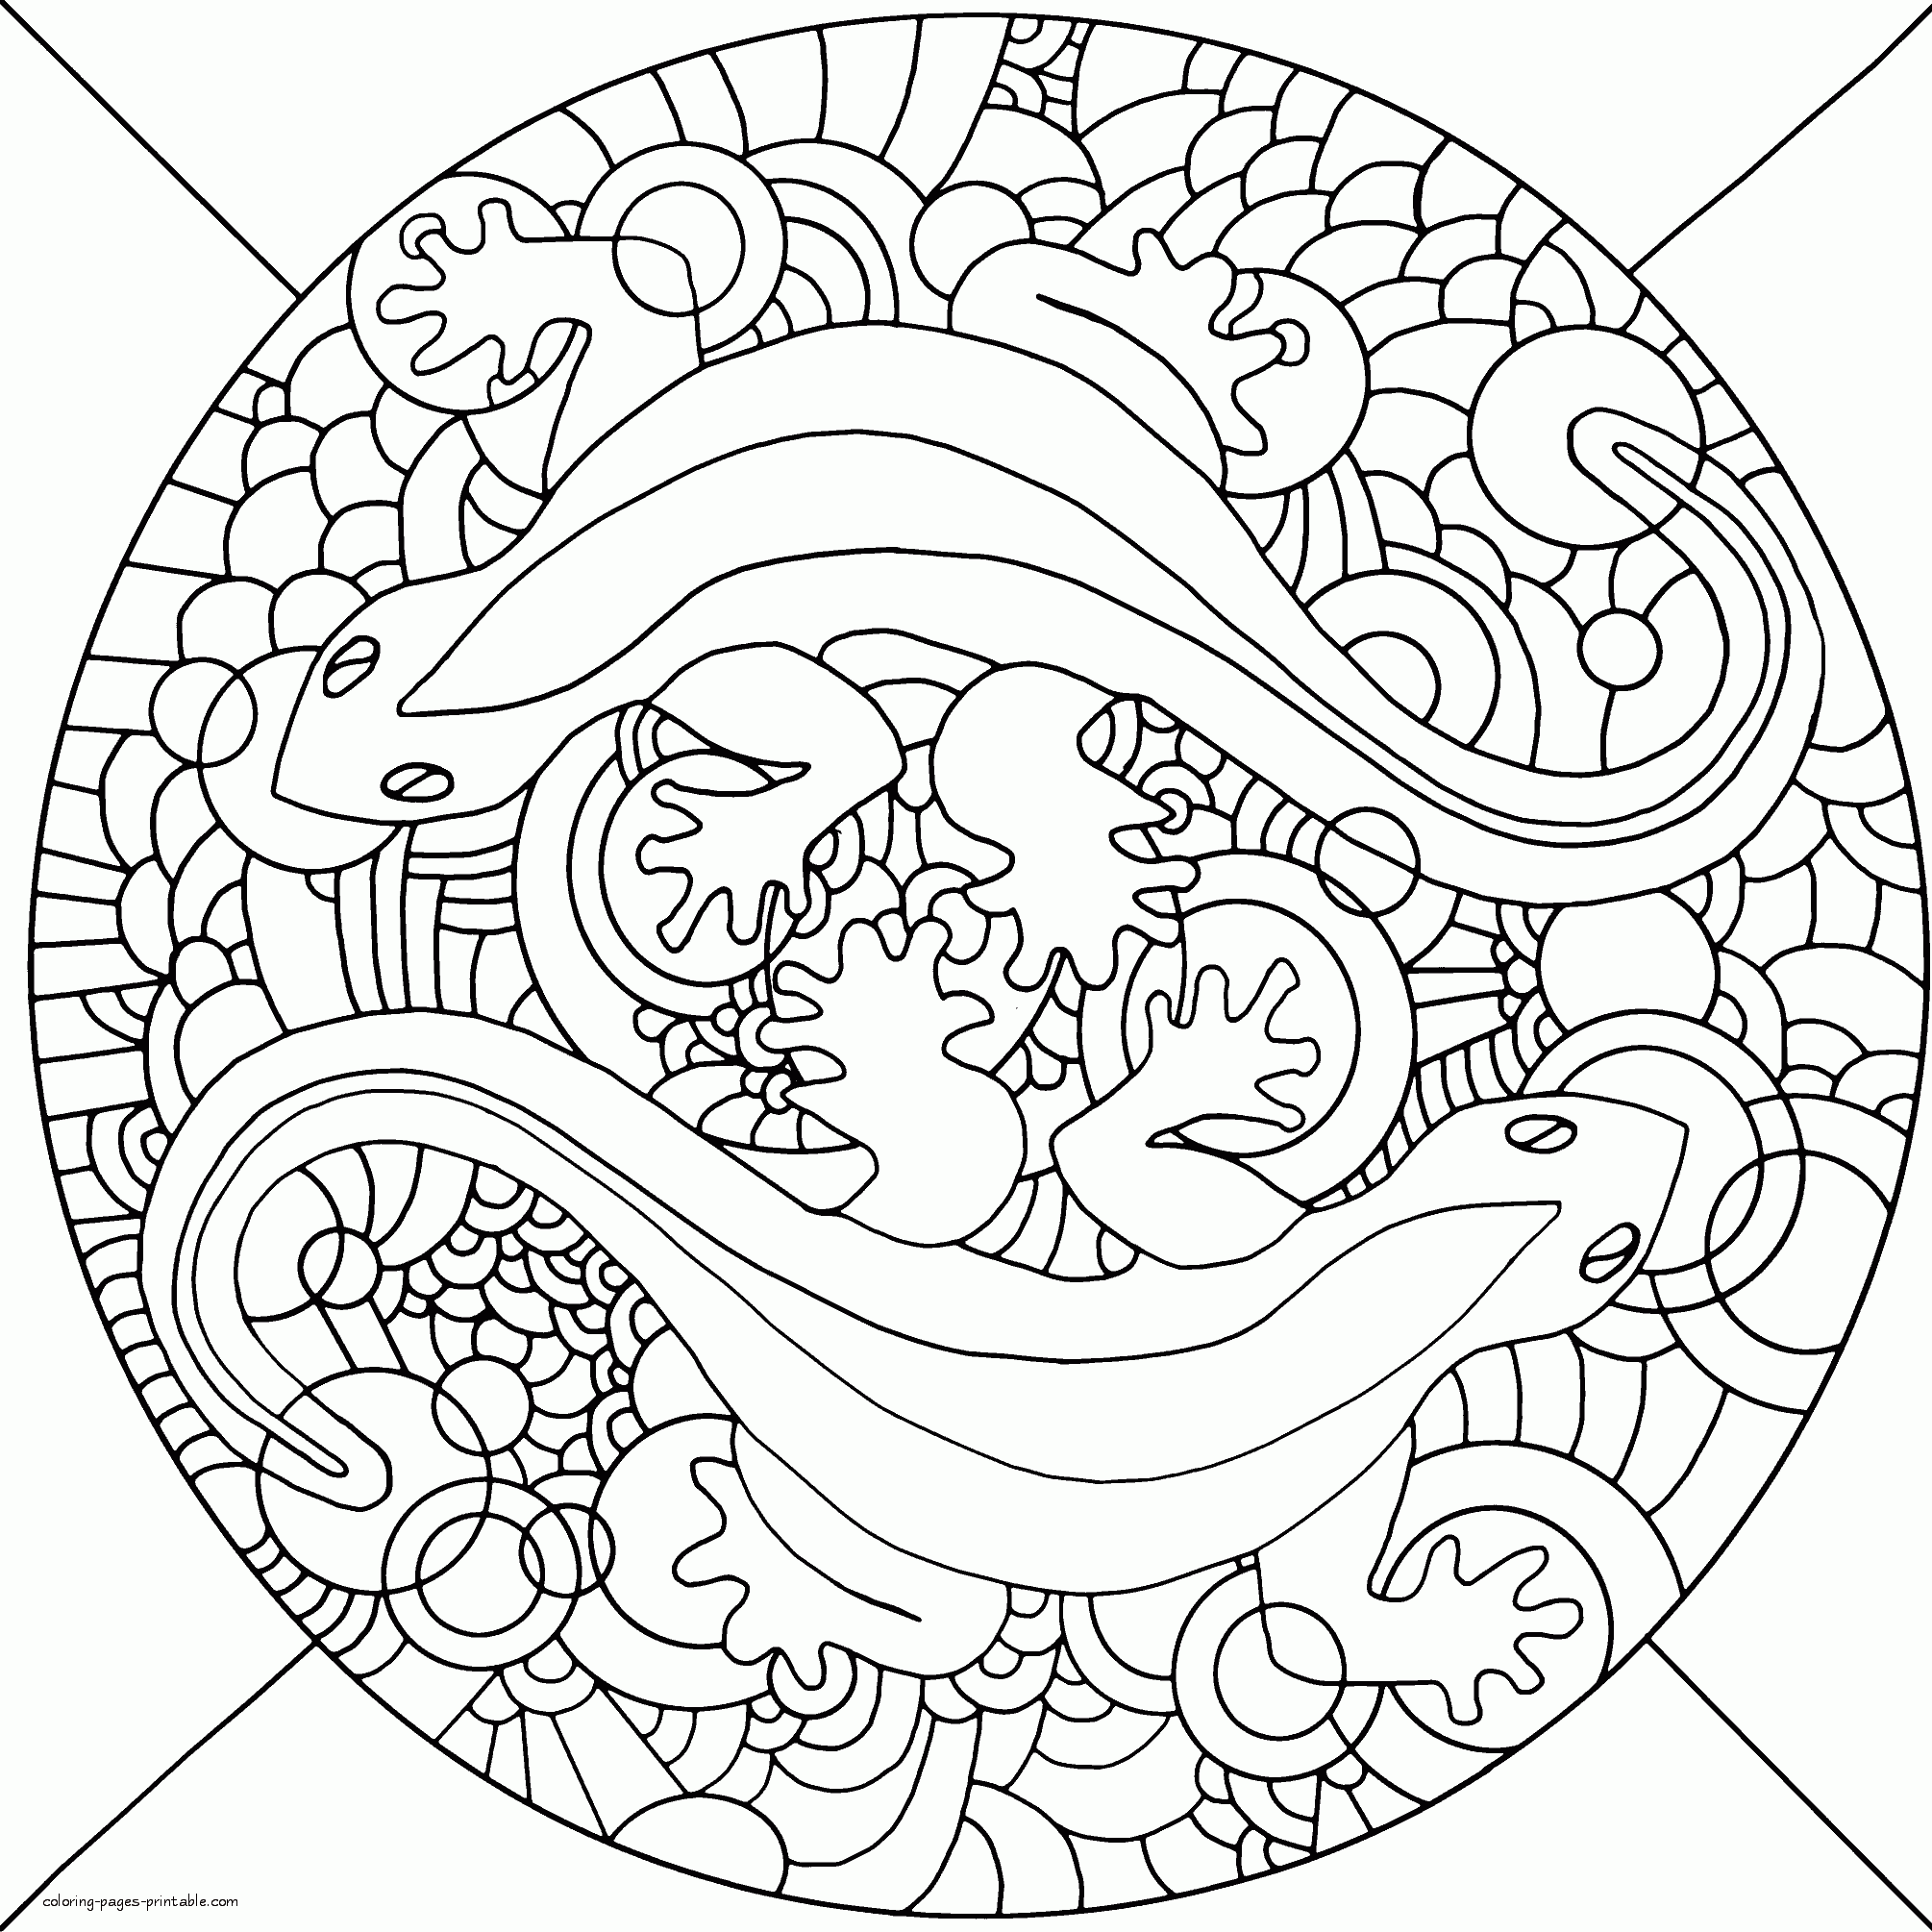 Lizards Coloring Page For Adult To Print